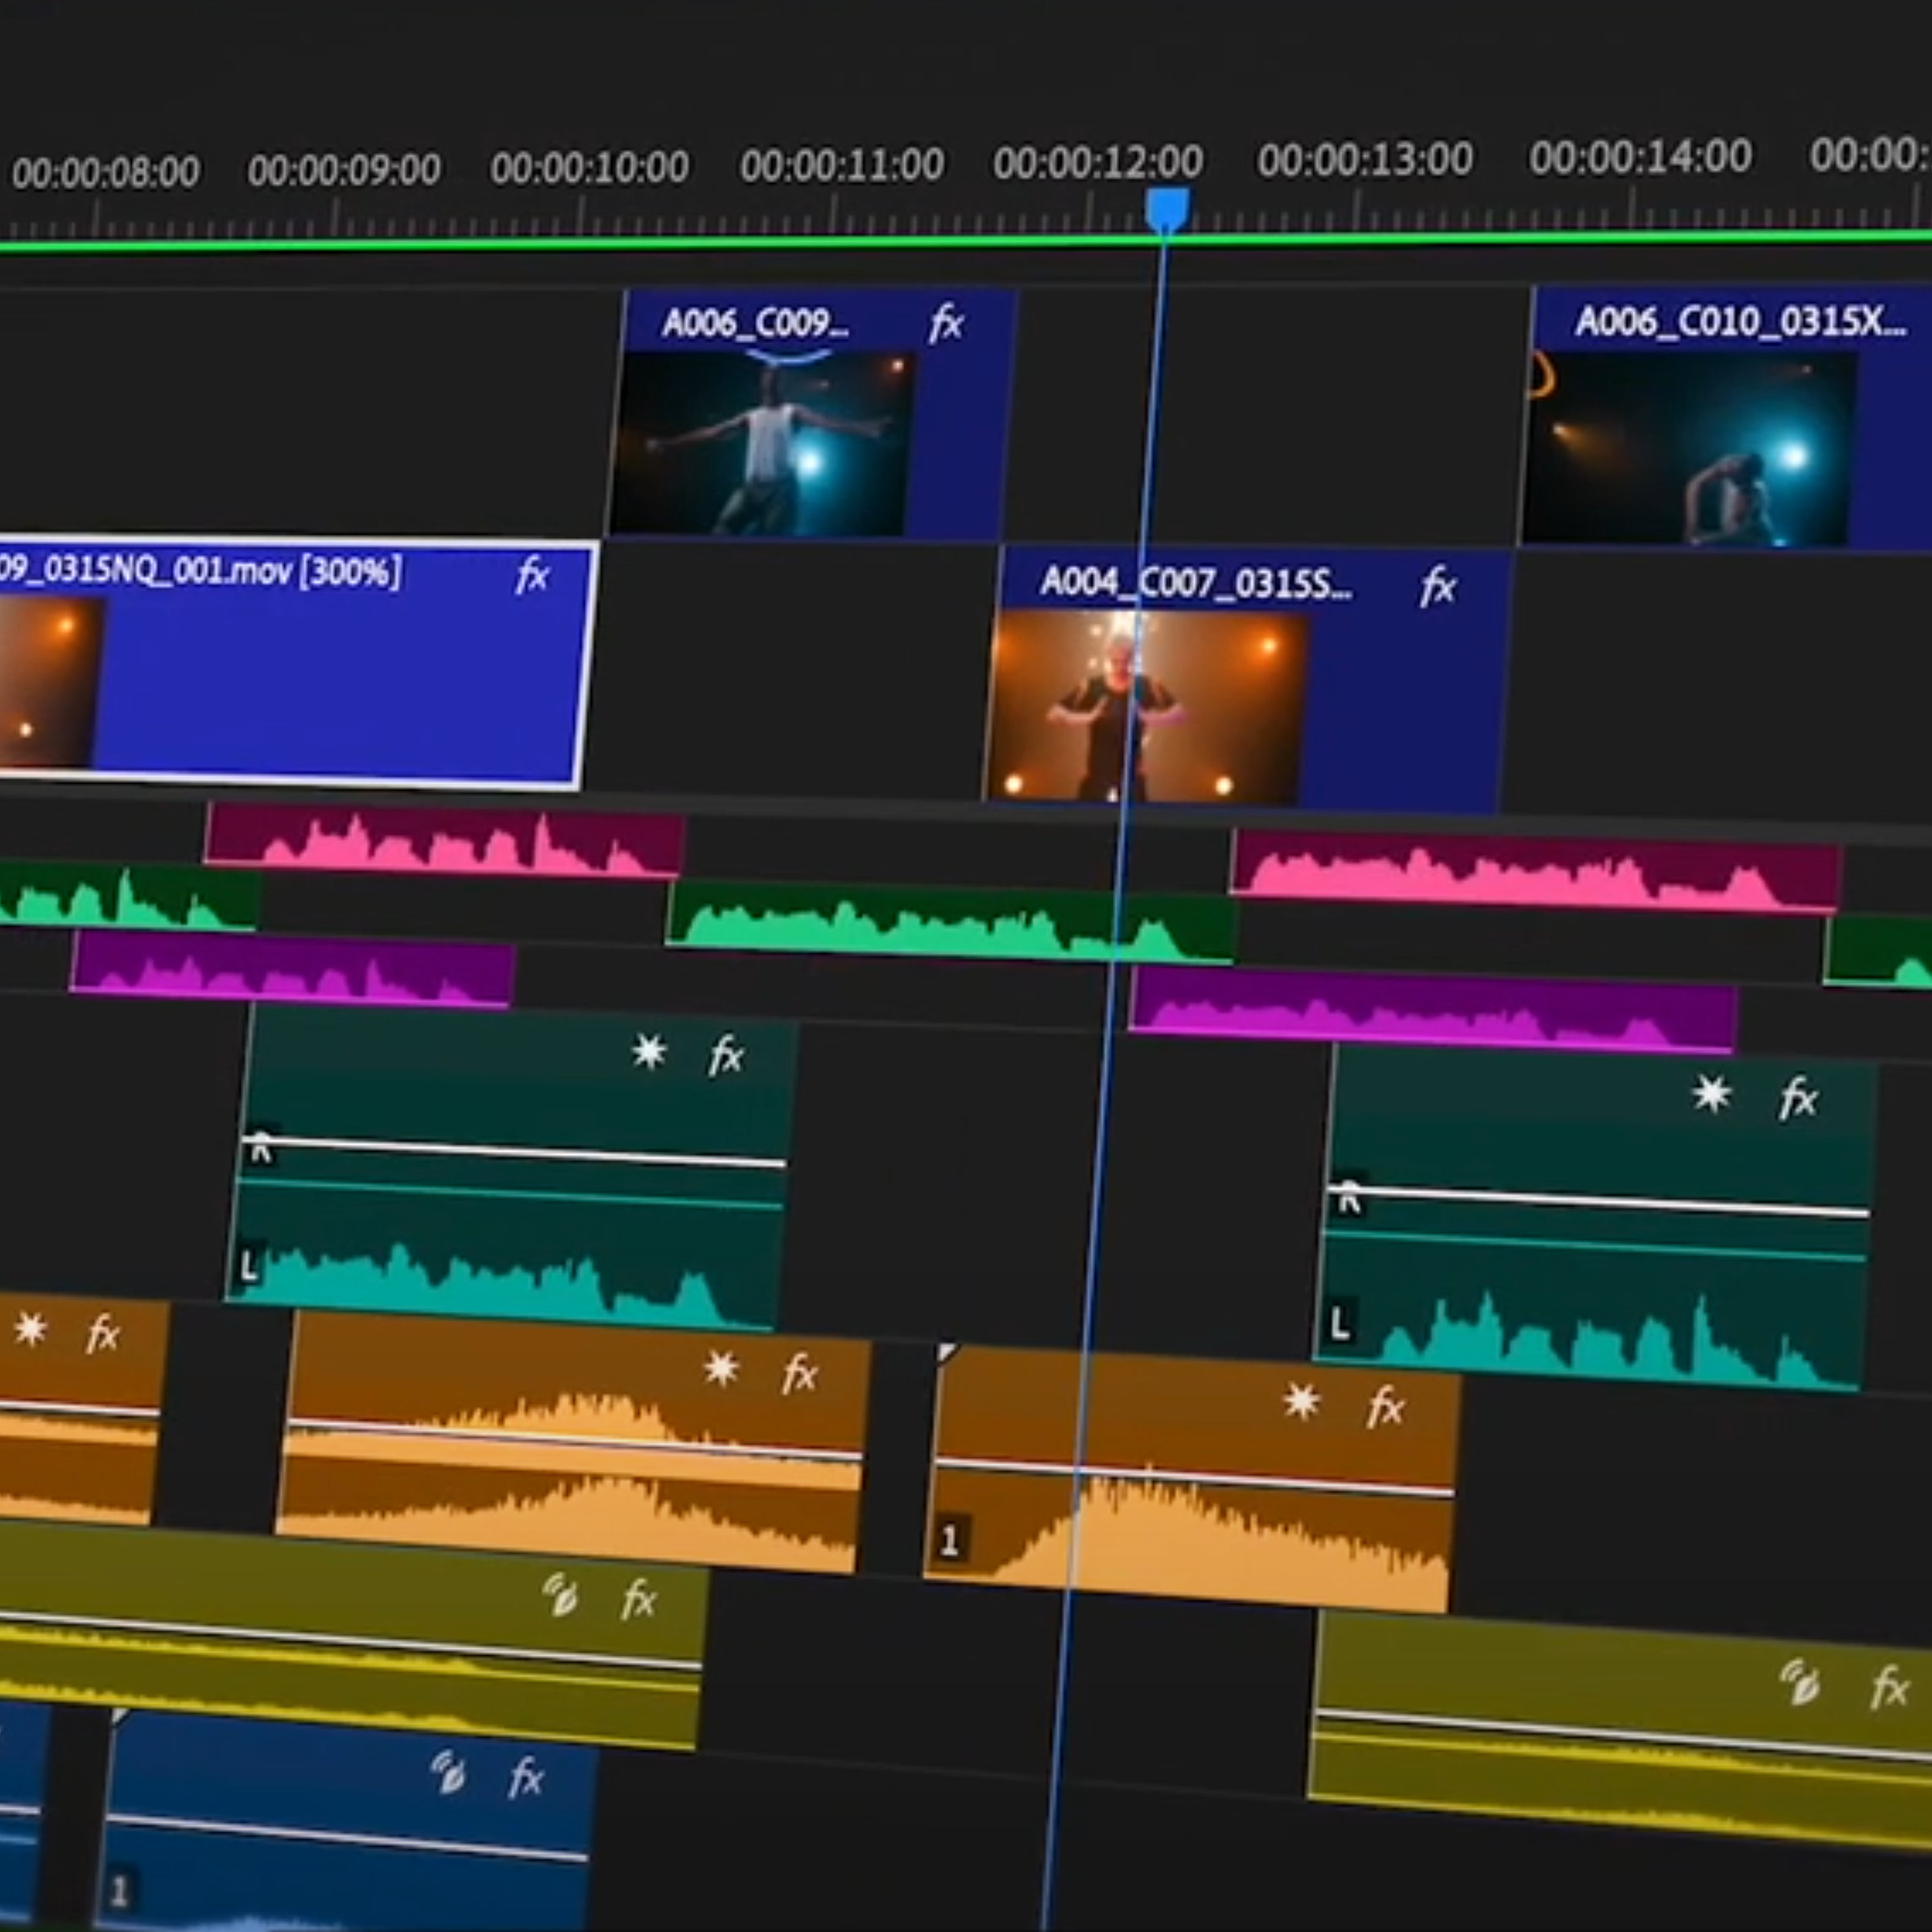 A screenshot taken of the Adobe Premiere Pro beta editing timeline with new track effects applied.